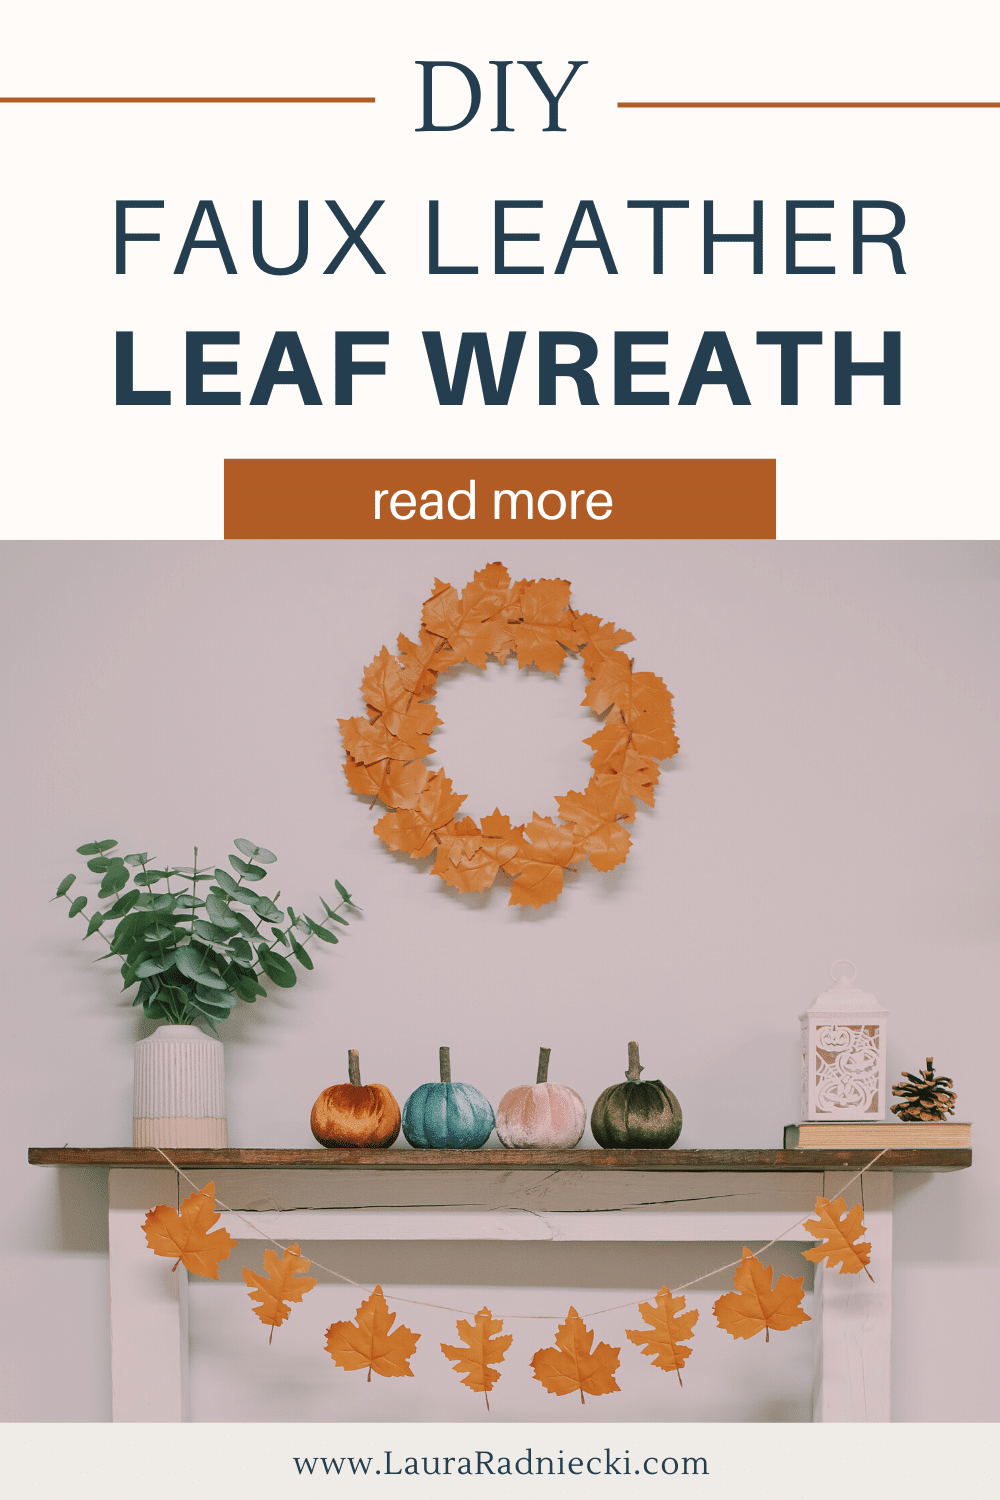 How to Make a Faux Leather Leaf Wreath